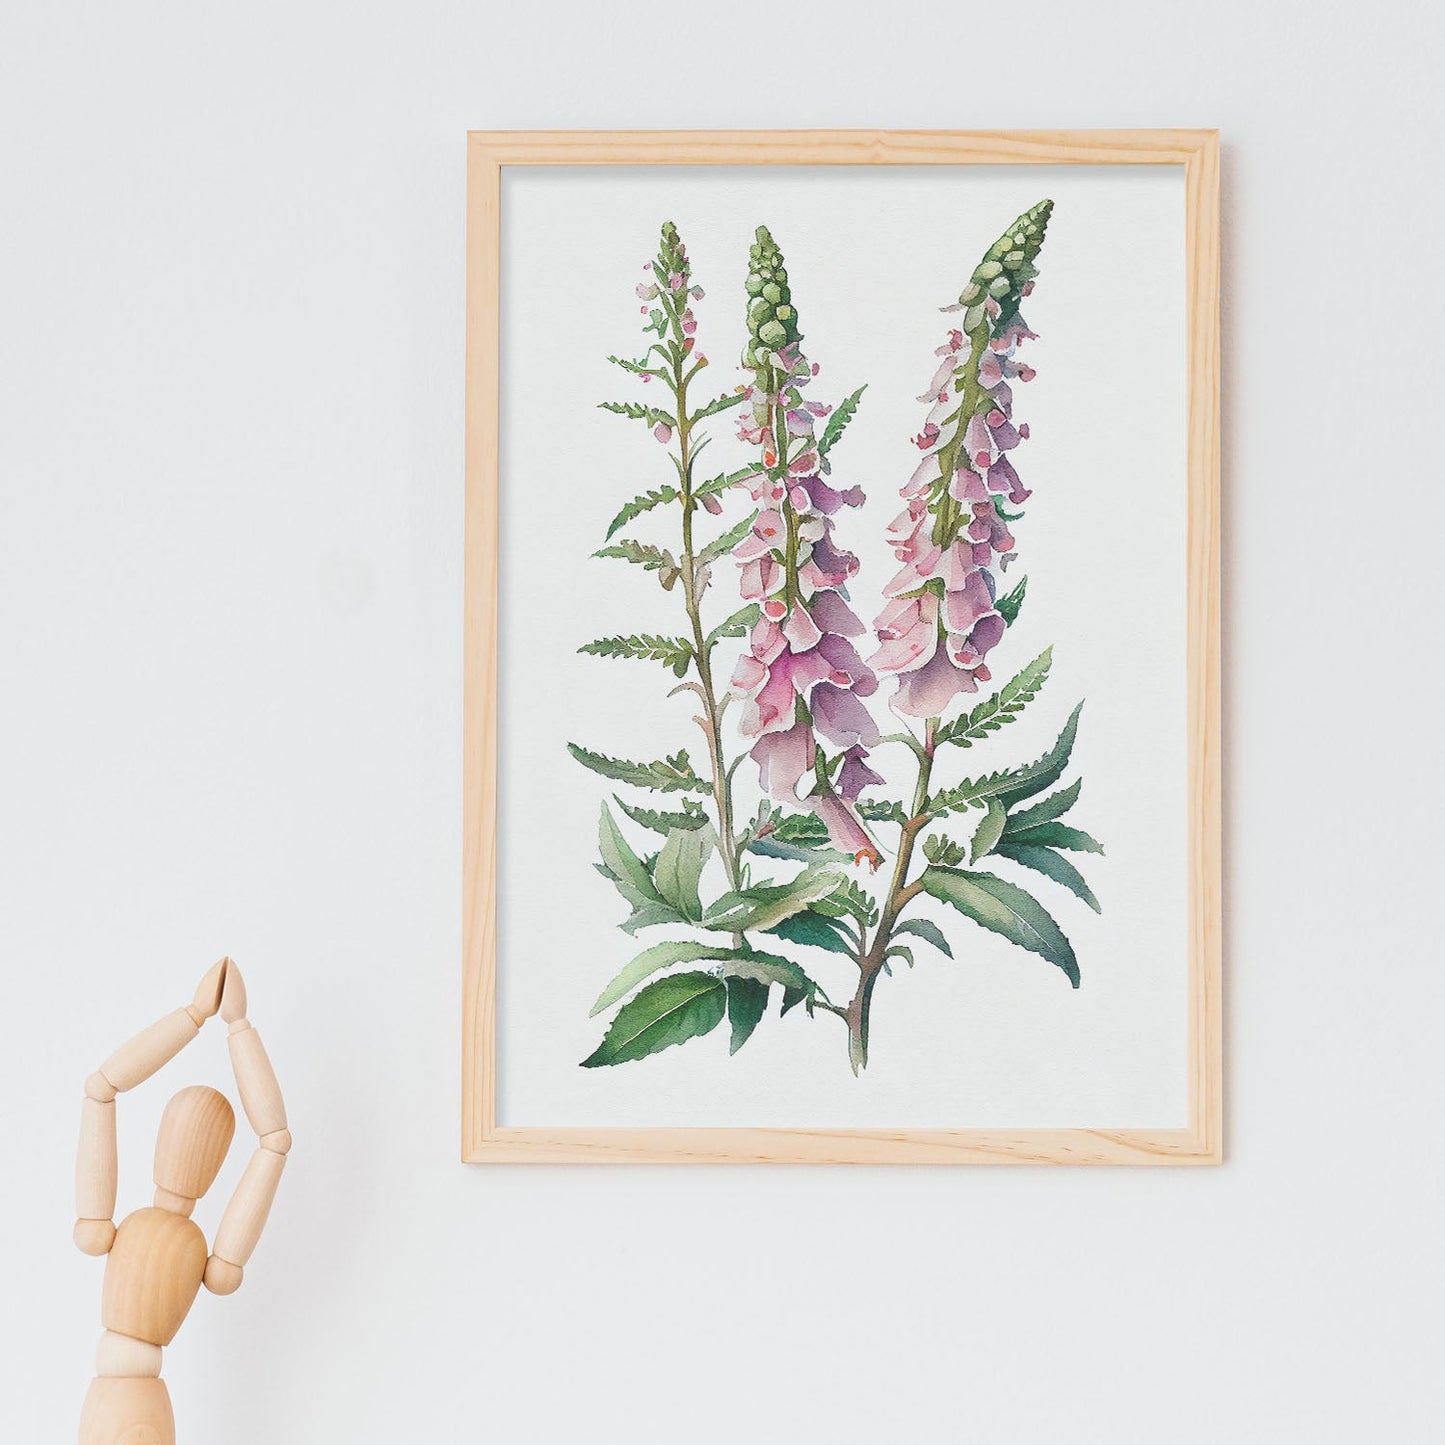 Nacnic watercolor minmal Foxglove_1. Aesthetic Wall Art Prints for Bedroom or Living Room Design.